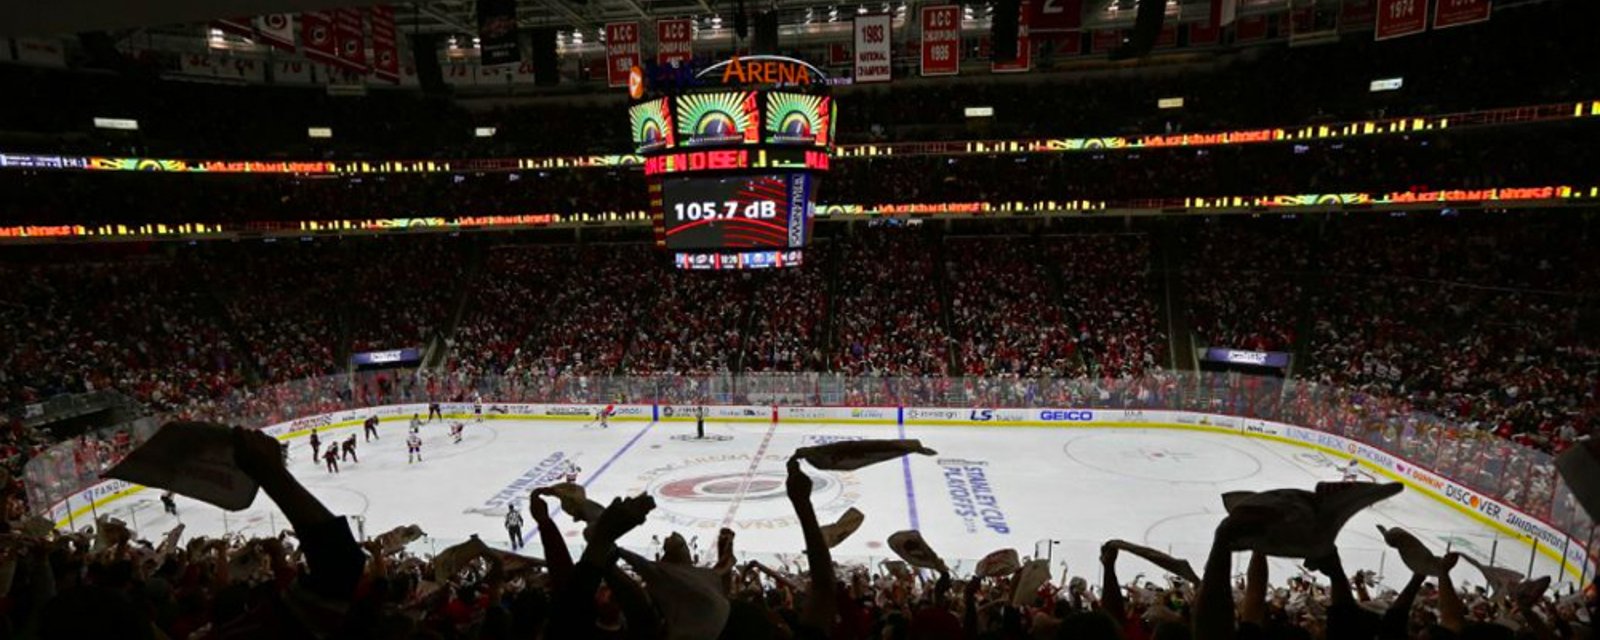 Attendance restrictions and spectator protocols for all 31 NHL teams